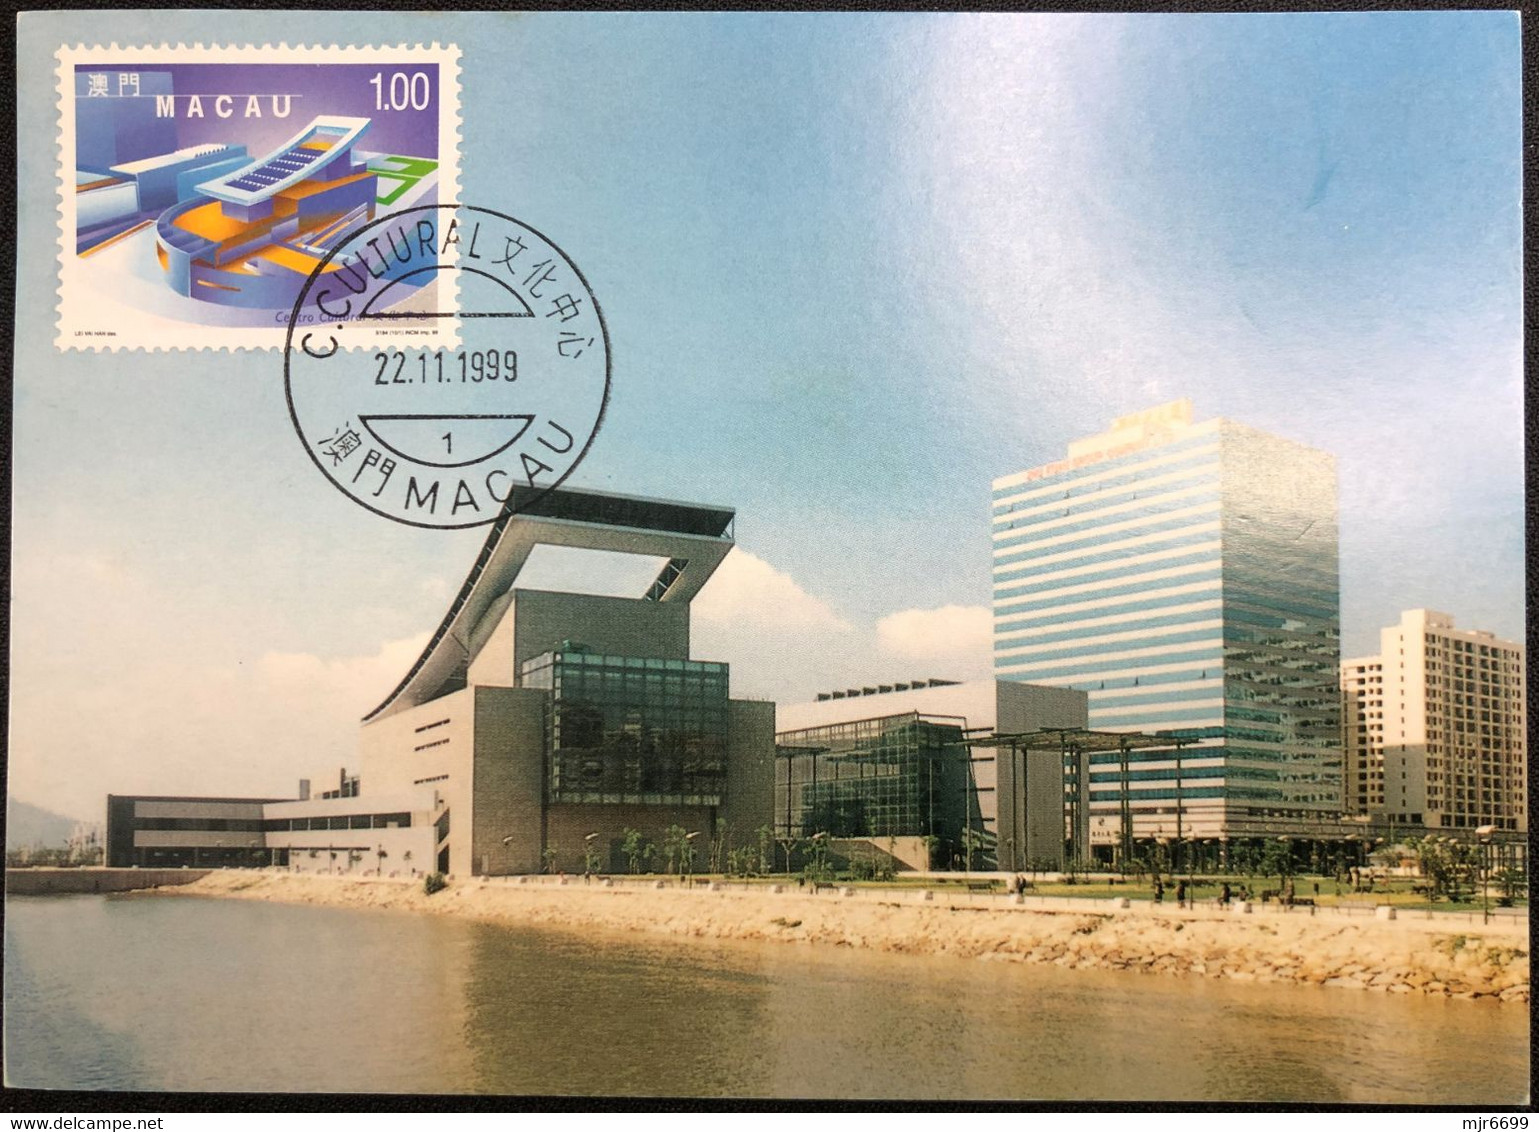 MACAU 1999 CULTURAL CENTRE MAX CARD (FIRST DAY WORK OF THE POST OFFICE IN THIS CENTRE) - Maximumkarten